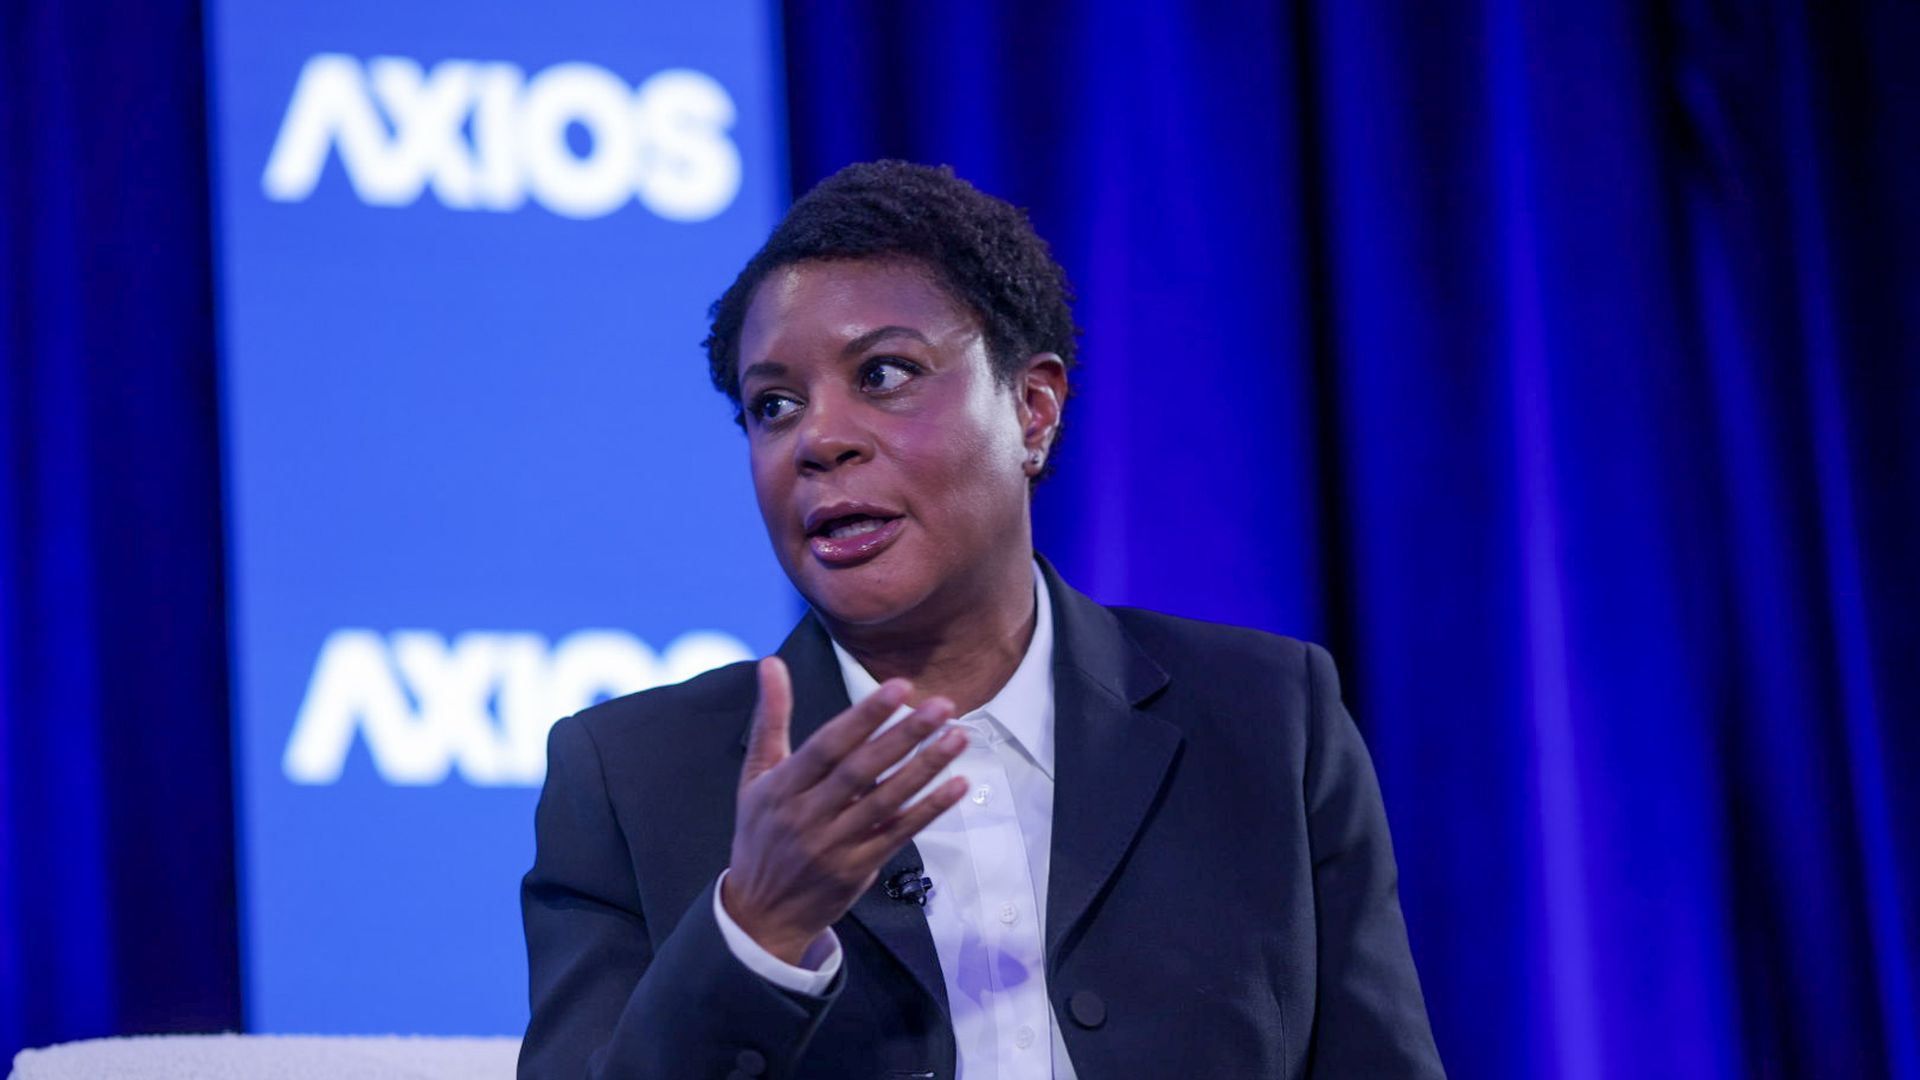 Alondra Nelson speaks with a hand outstretched, wearing a white shirt and dark jacket speaks in front of a blue background with AXIOS written in white